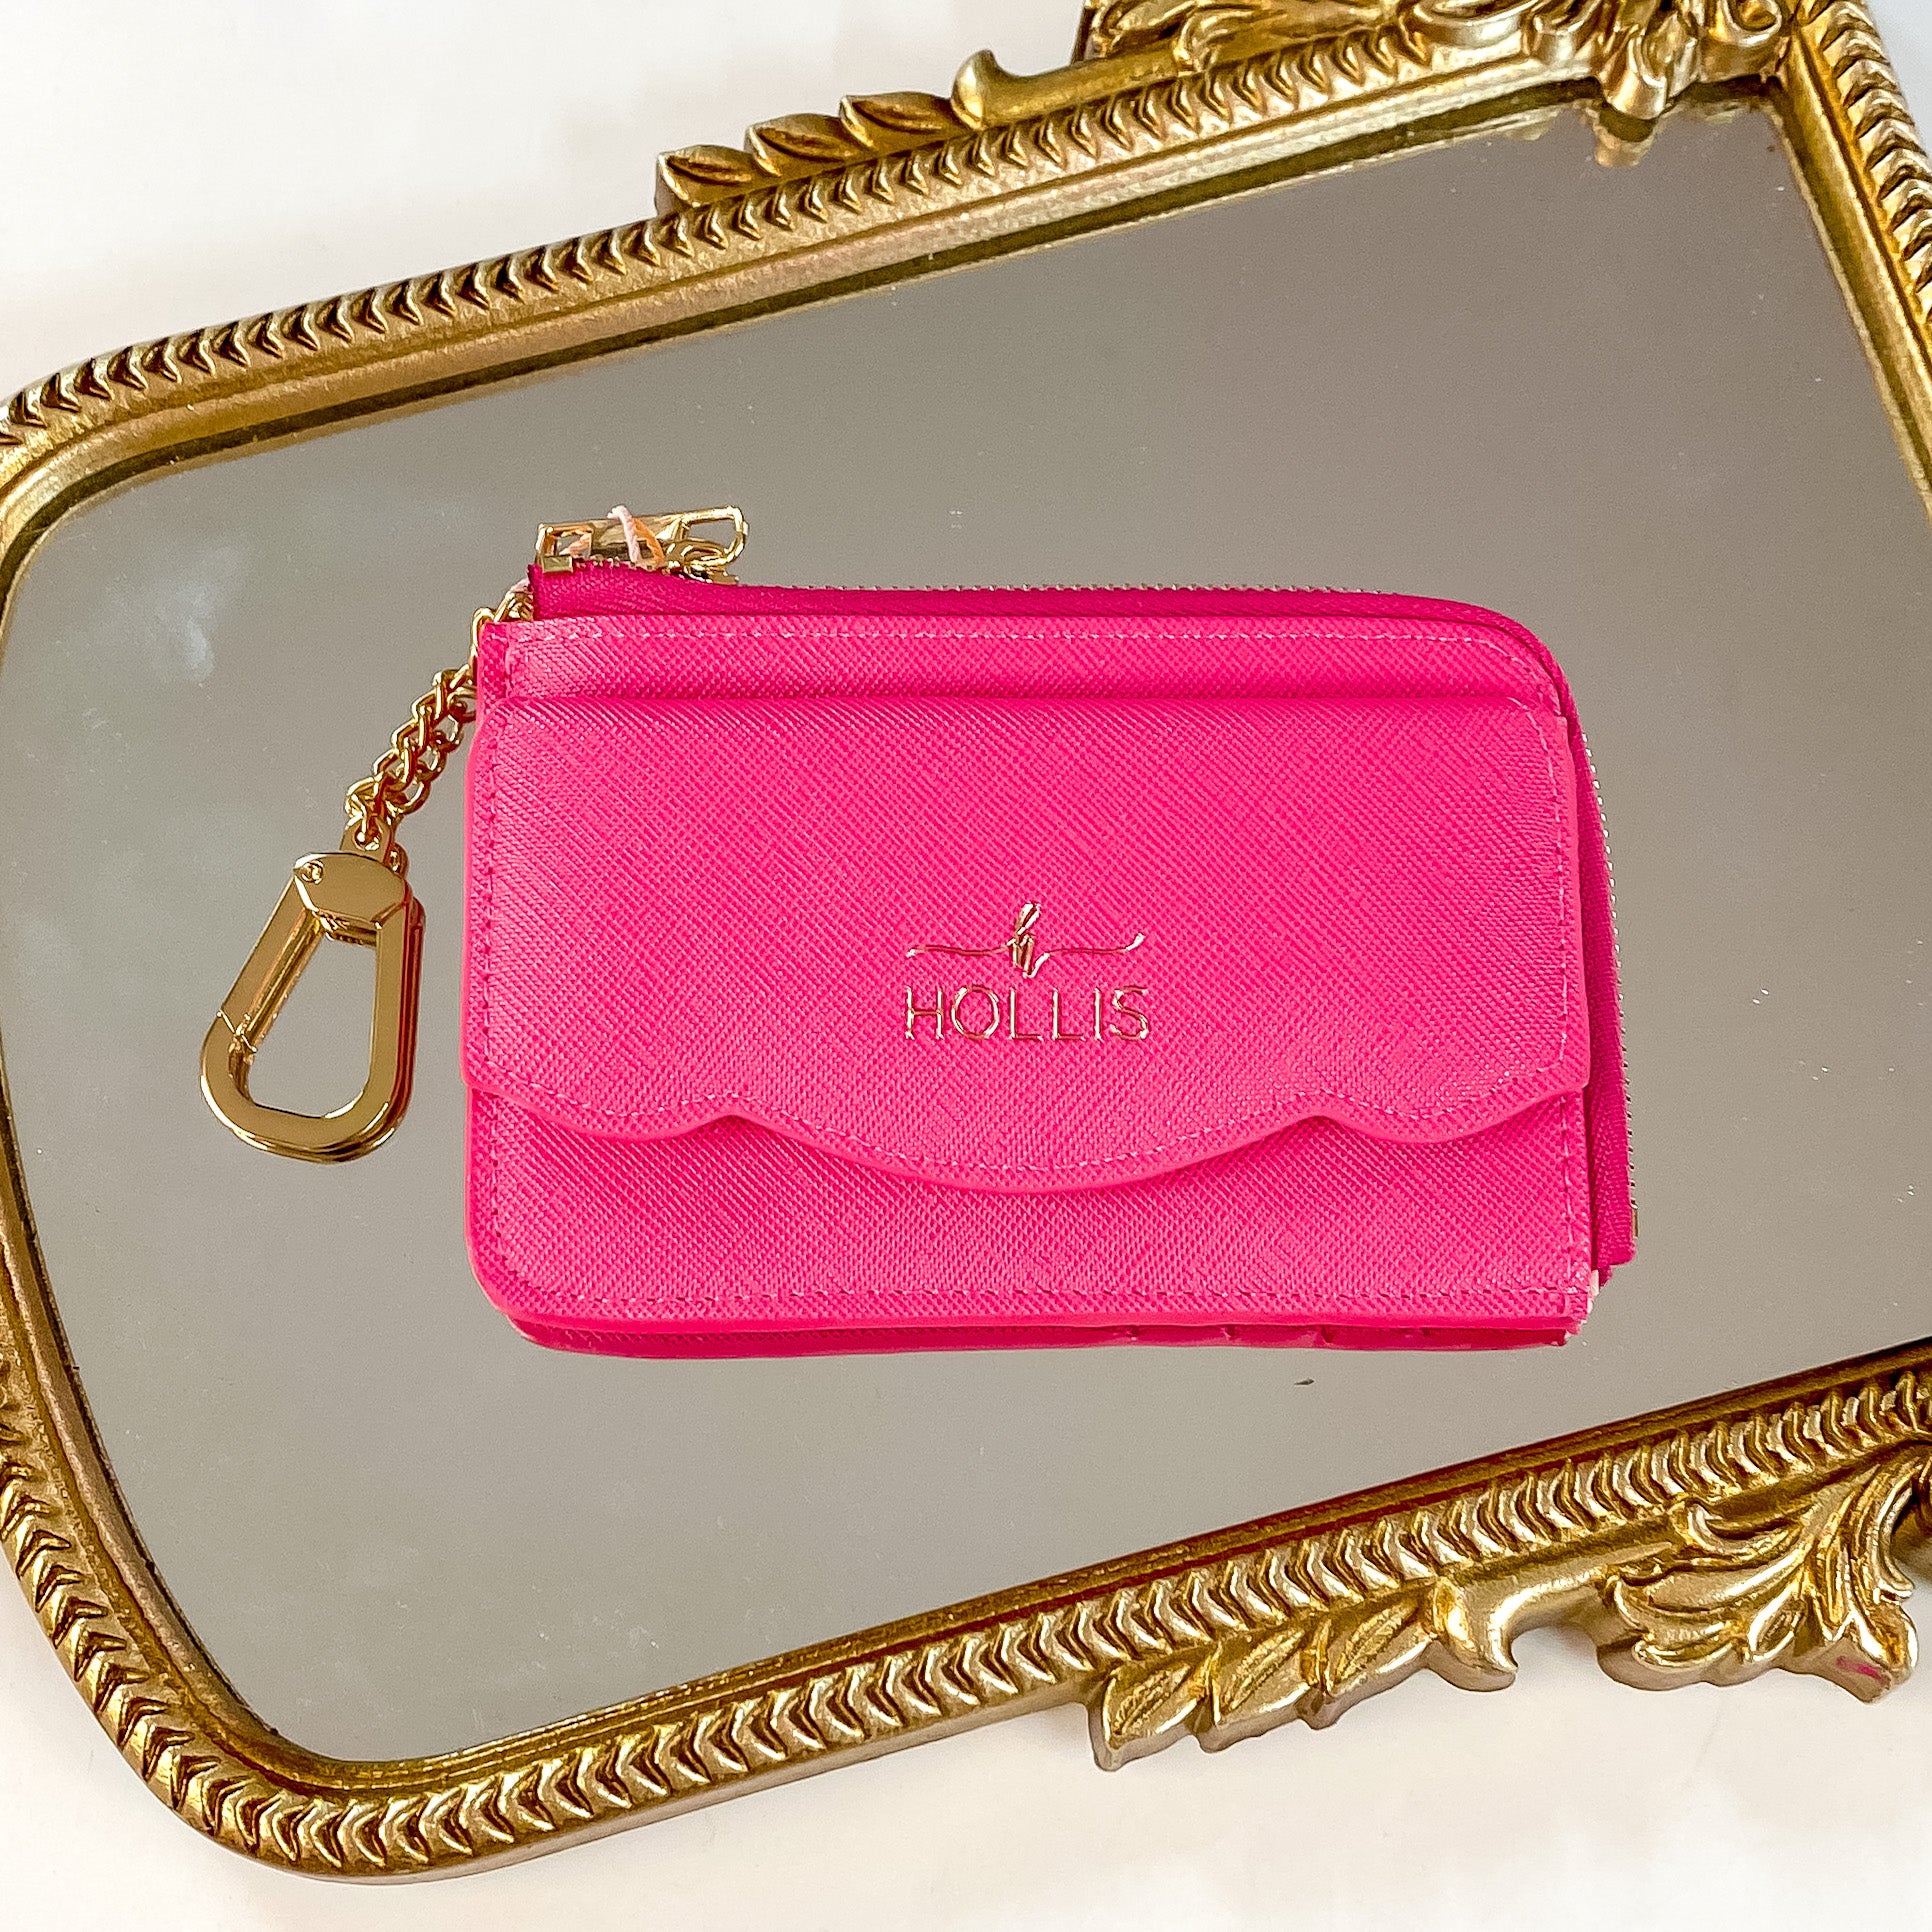 Hollis brand card holder wallet in hot pink. Wallet also has a gold chain connected to it. Pictured on a mirror with a gold frame.